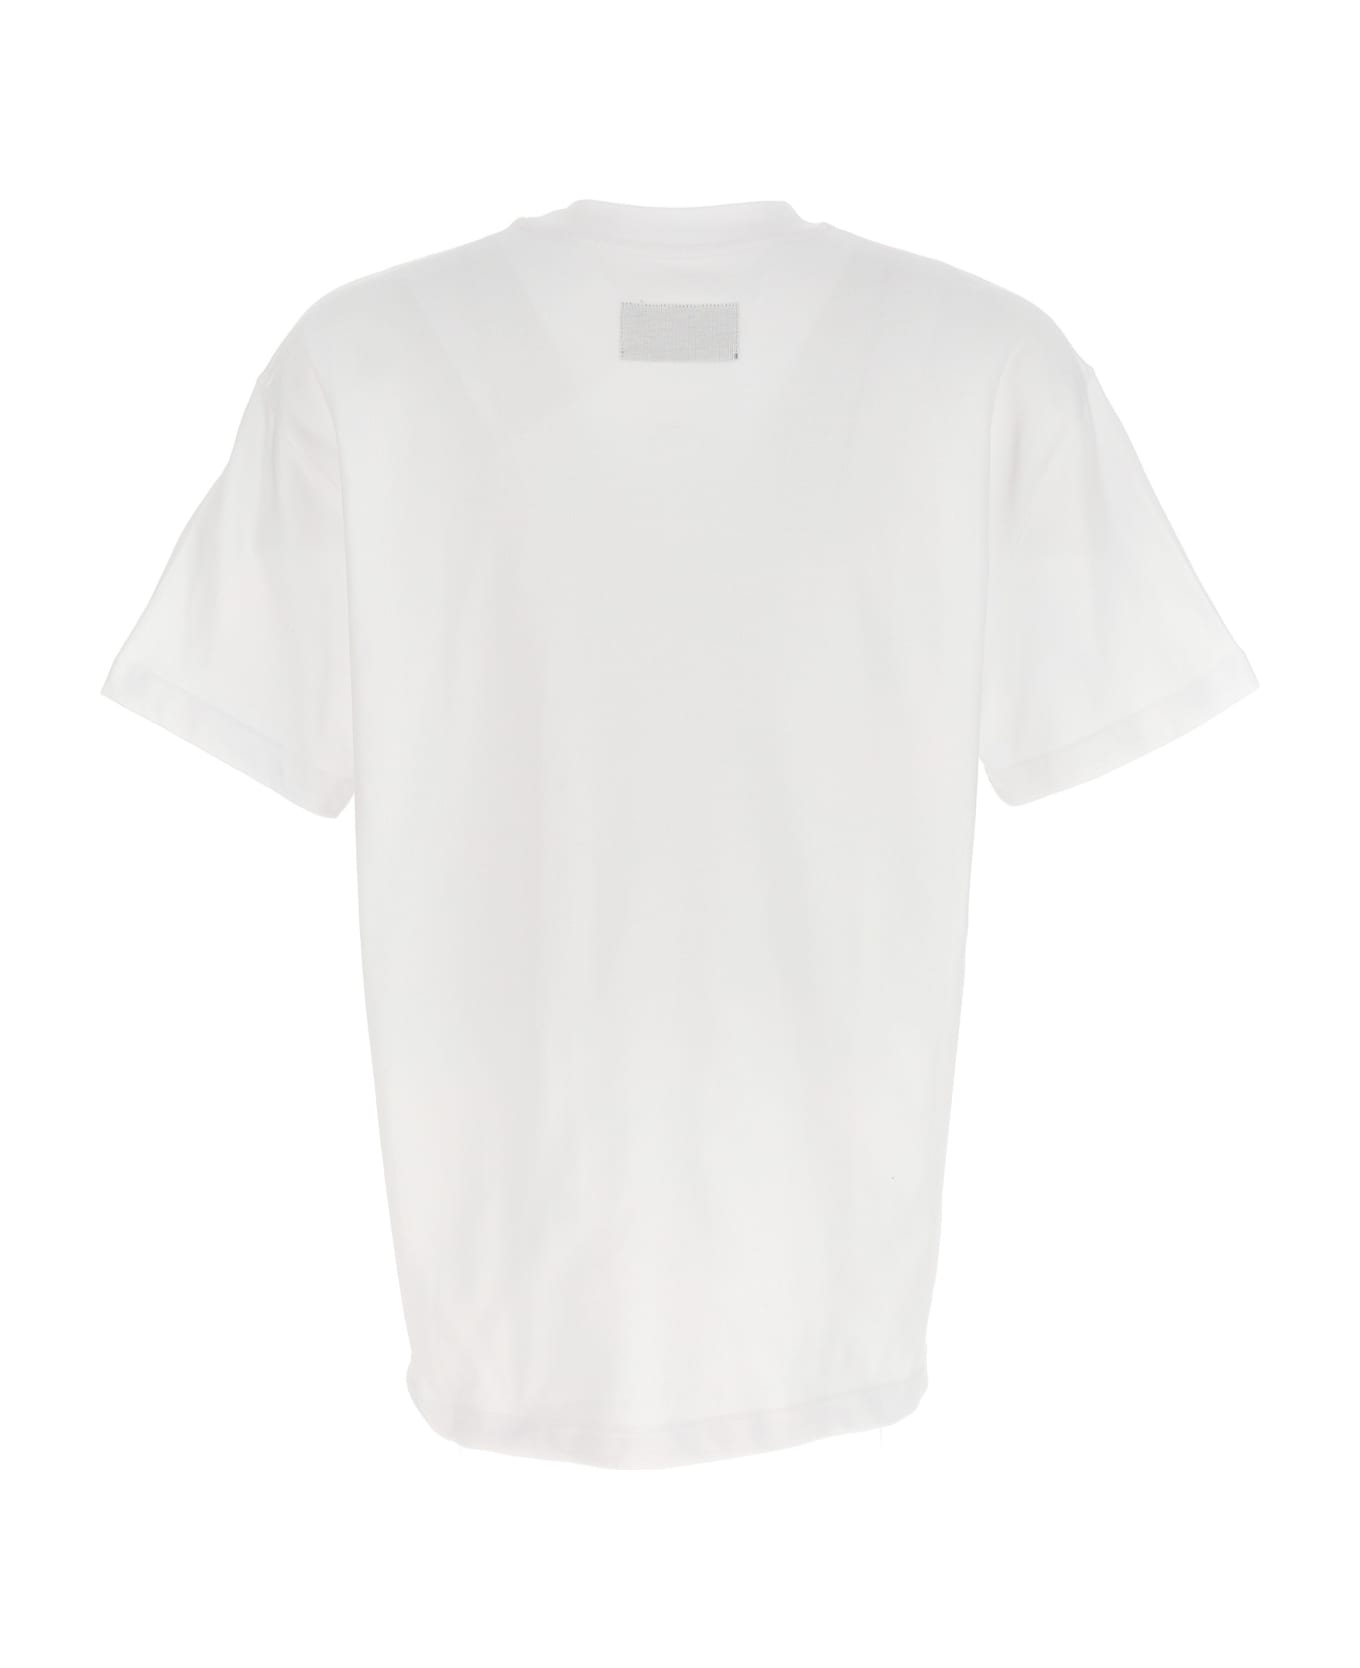 A-COLD-WALL Logo Embroidery T-shirt - White